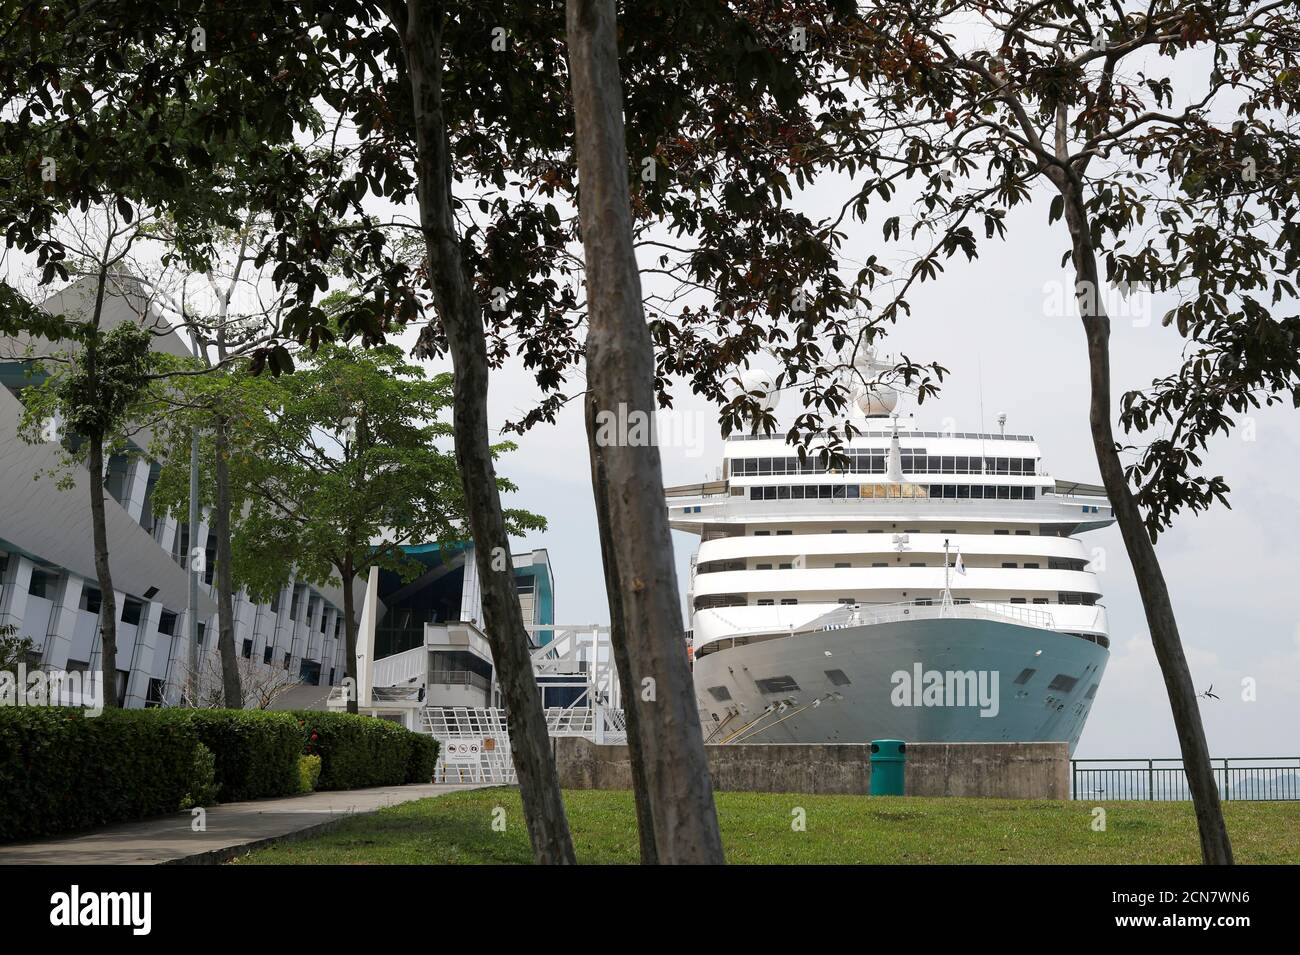 View of Star Cruise's Superstar Gemini, which is currently being accessed for use as temporary accommodation for migrant workers, berthed at Marina Bay Cruise Center, Singapore, April 17, 2020. REUTERS/Edgar Su Stock Photo